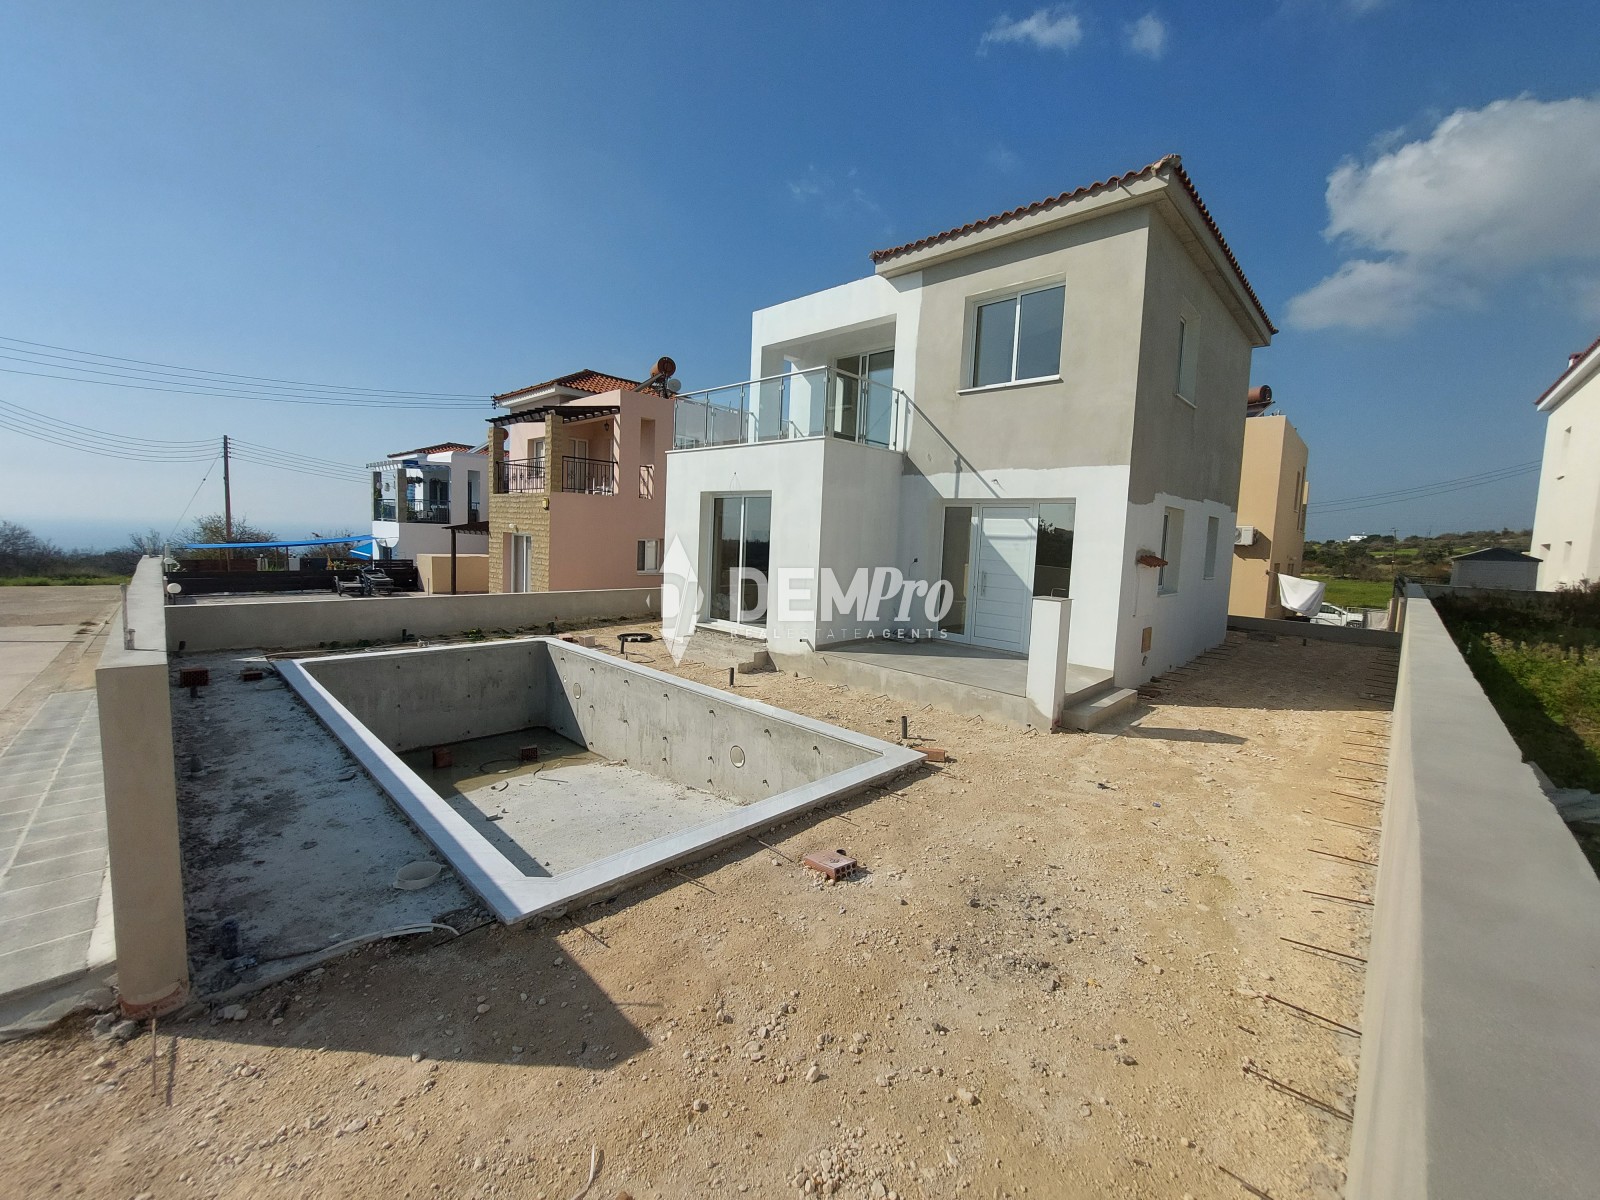 Bungalow For Sale in Tala, Paphos - DP3855